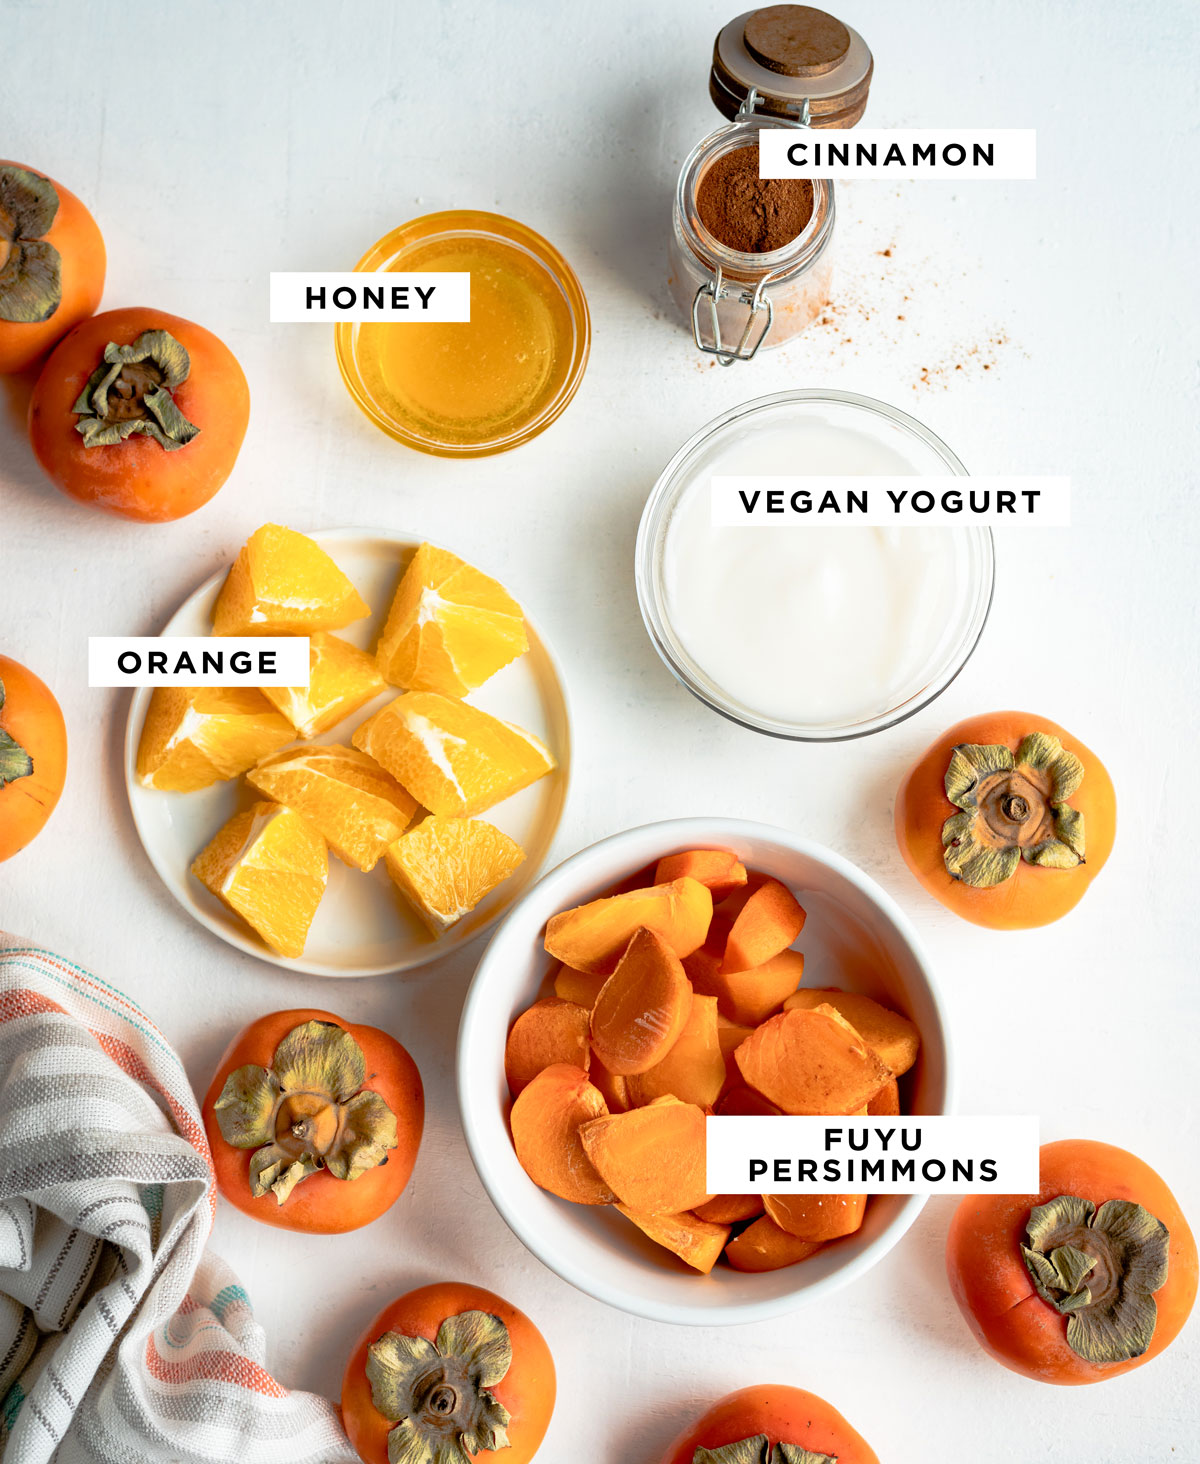 labeled ingredients for a persimmon smoothie including cinnamon, honey, vegan yogurt, orange and Fuyu persimmons.